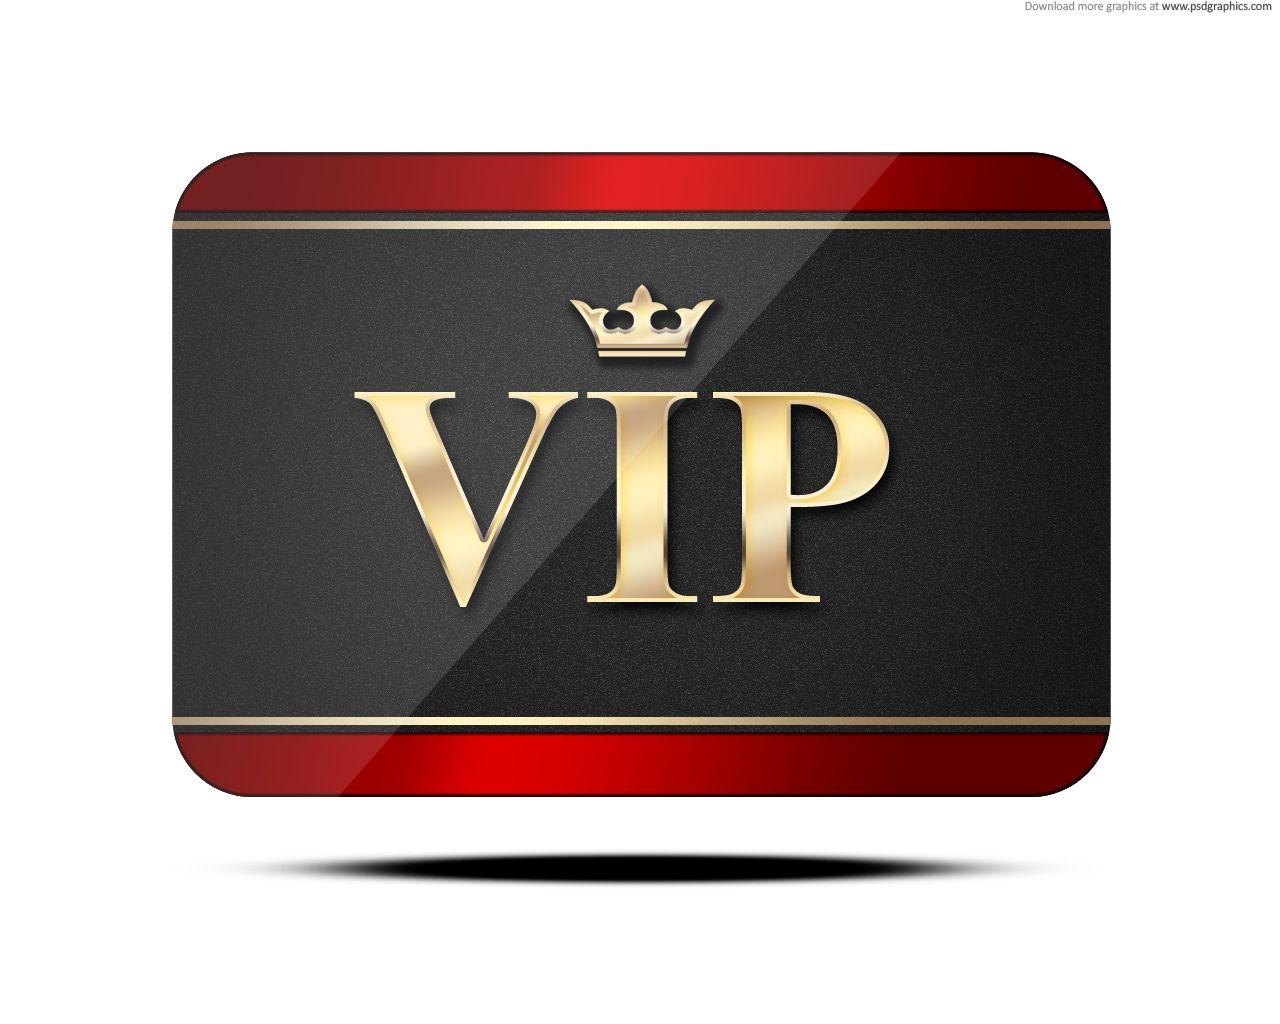 Red Black and Gold Logo - VIP card (PSD) | PSDGraphics